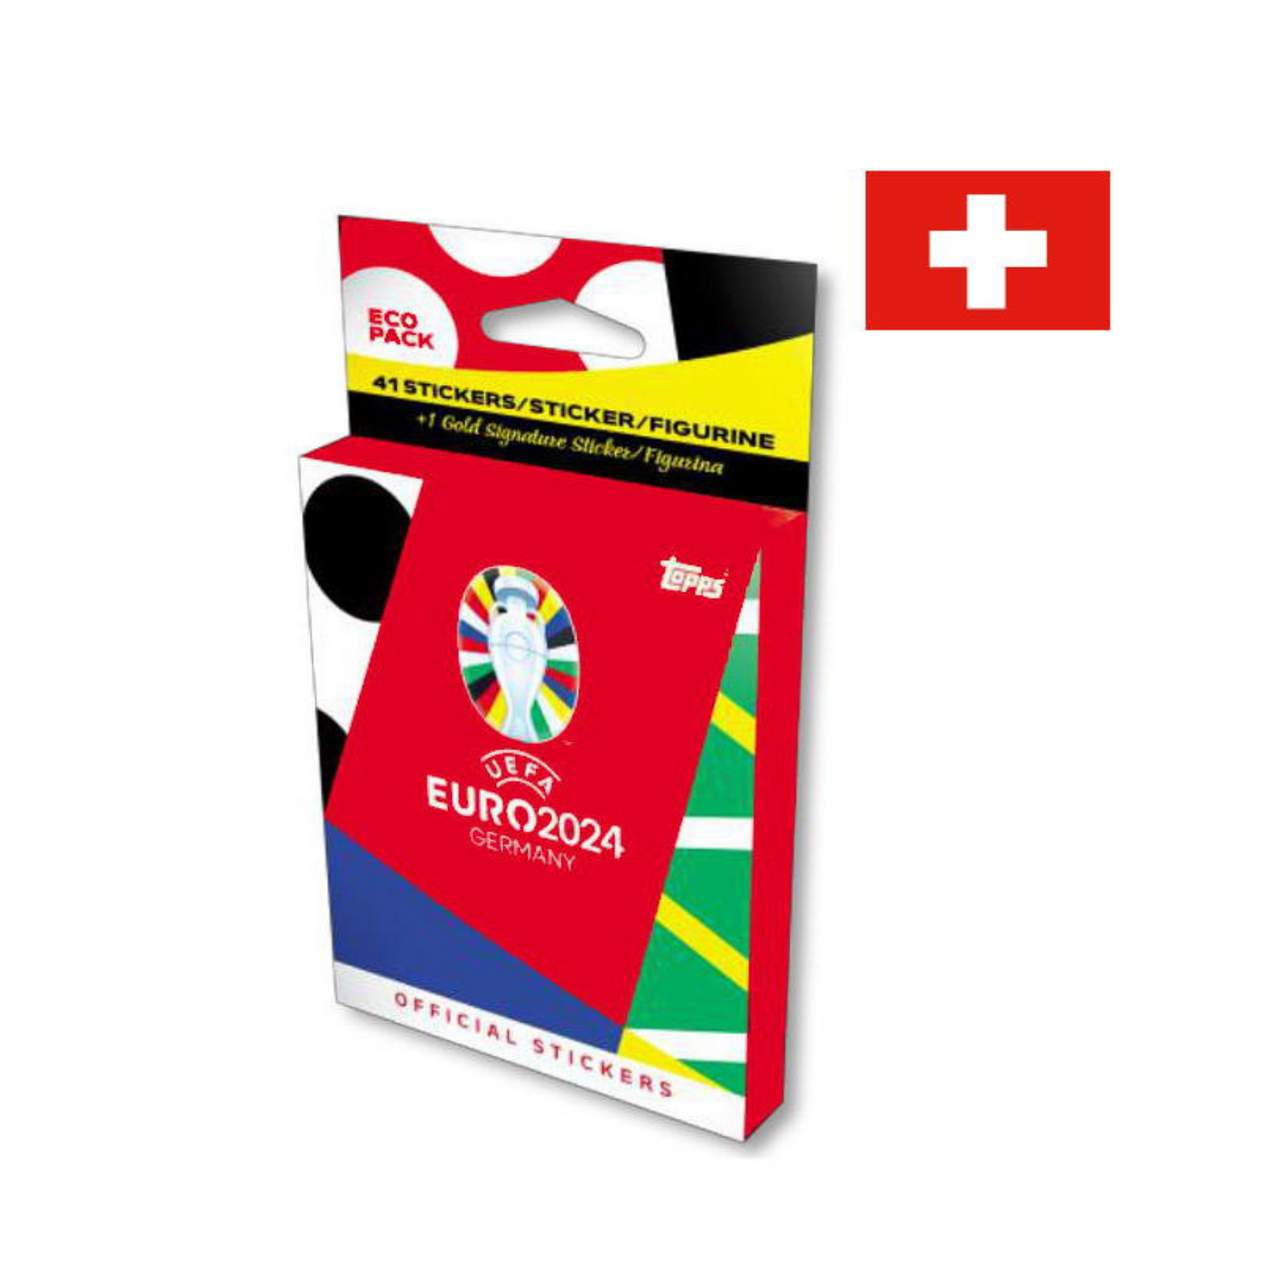 Topps EURO 2024 Sticker - Eco Pack - SWISS EDITION